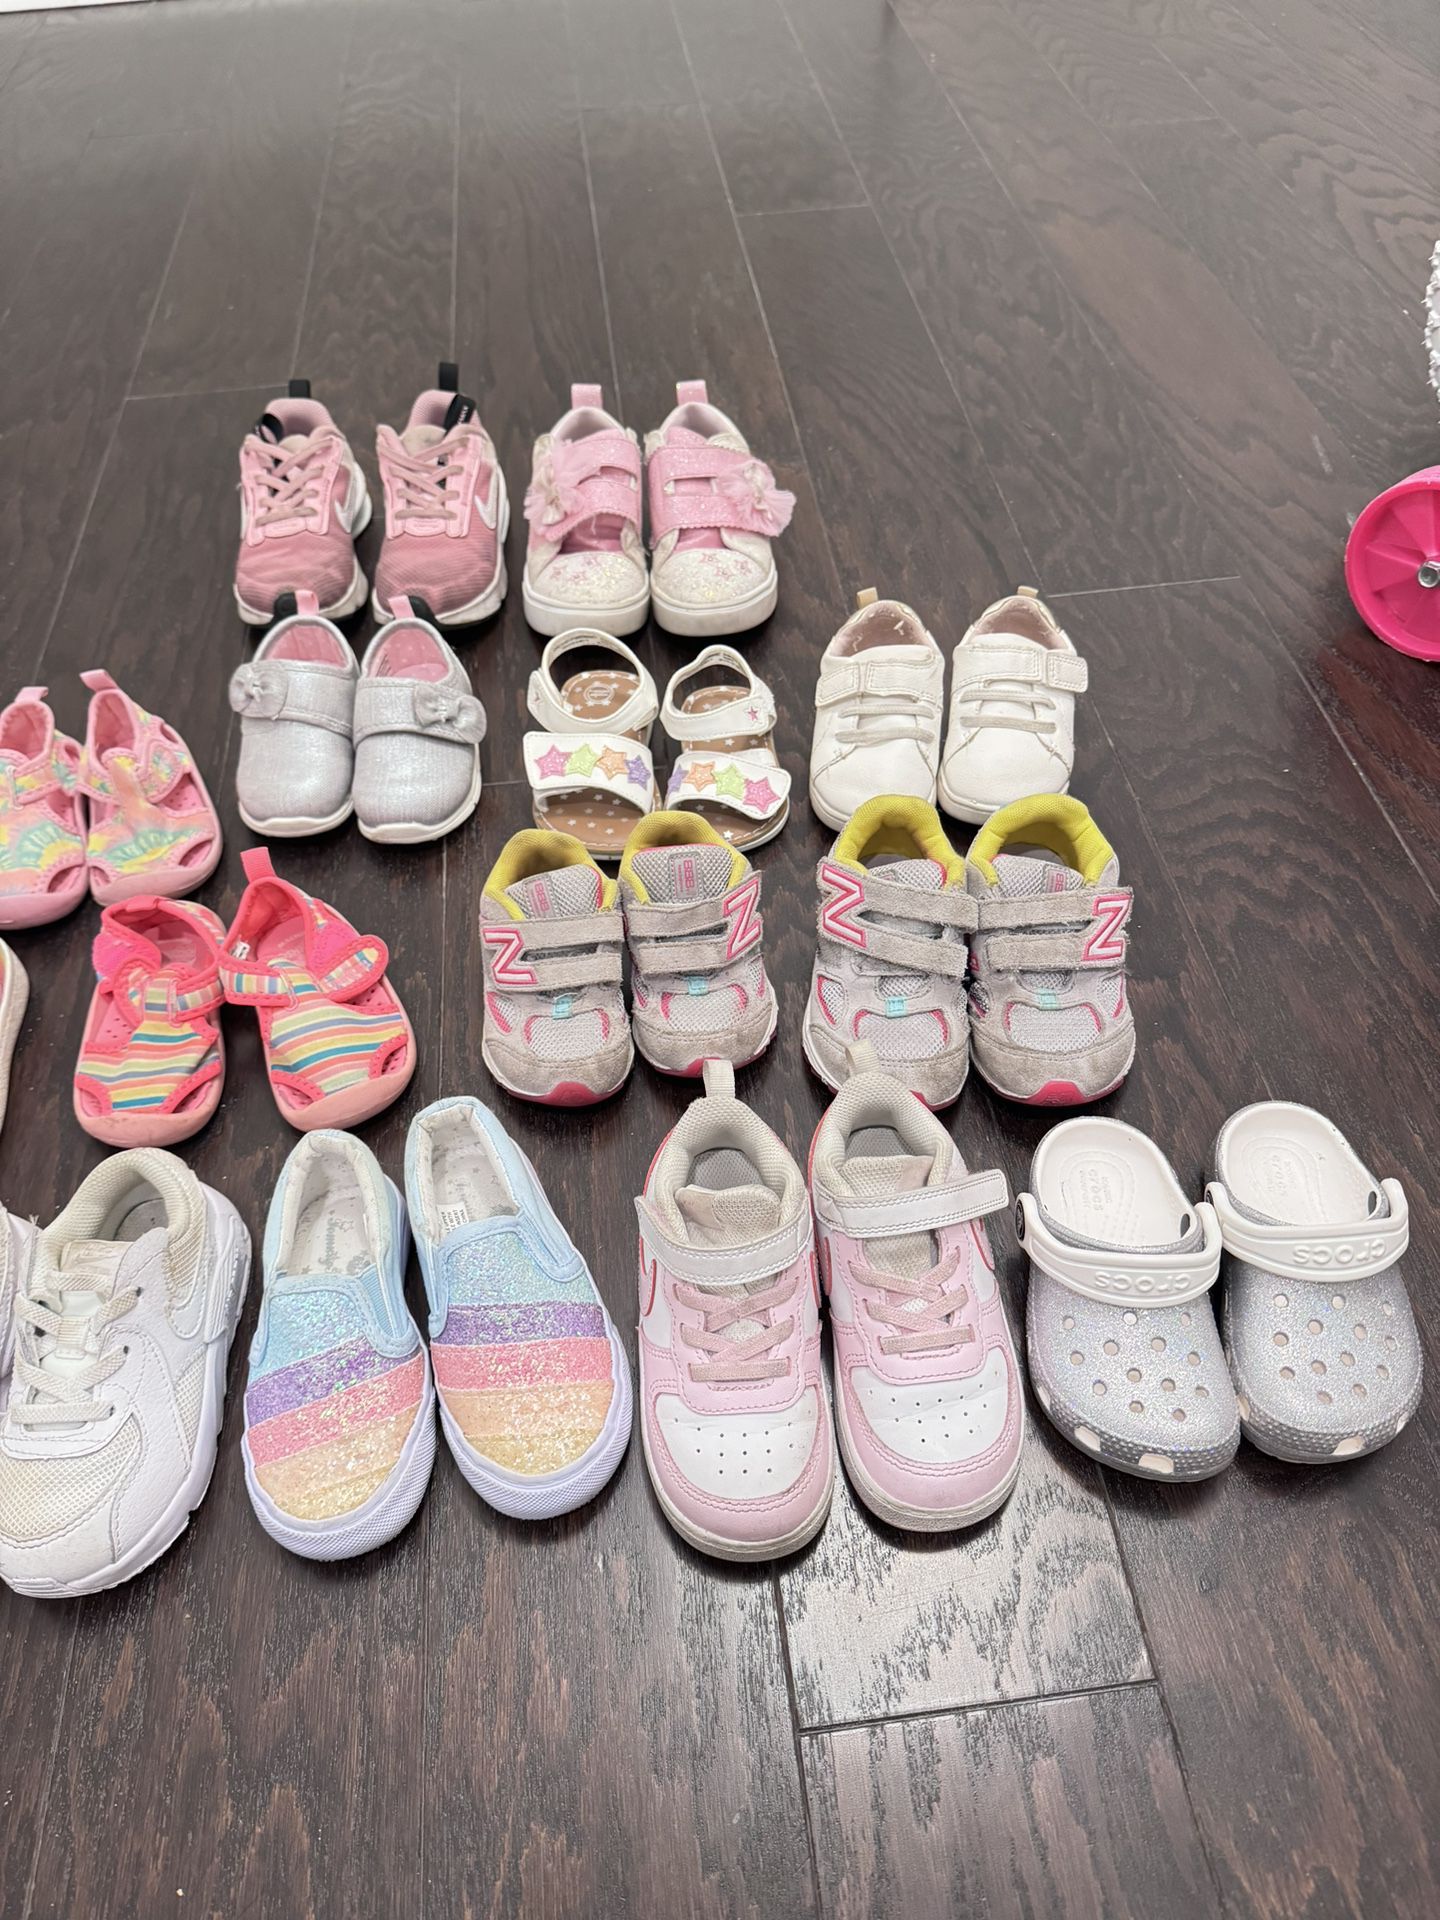 Kids Girl Shoes 1-3 Years Old